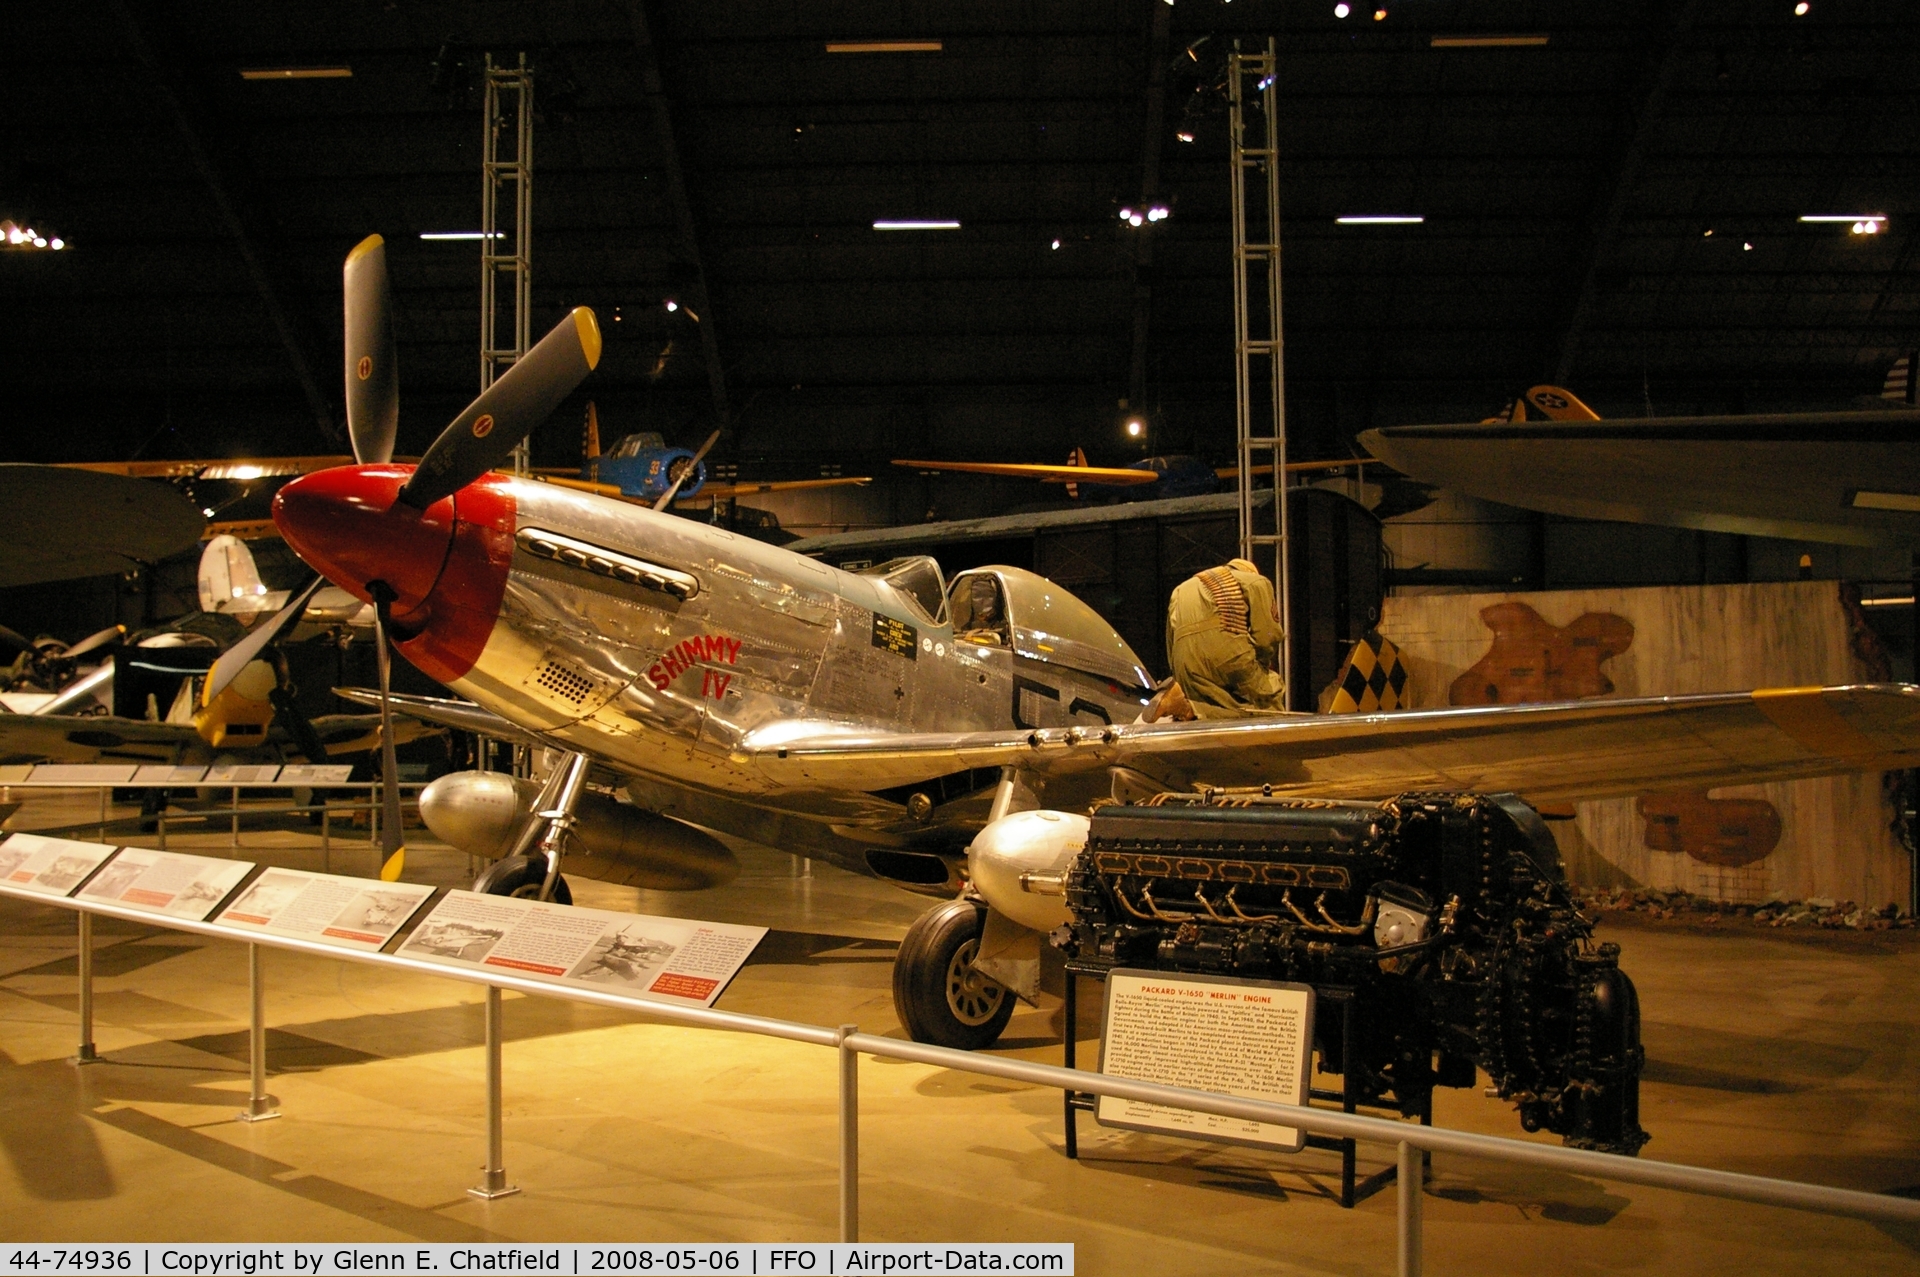 44-74936, 1944 North American P-51D-30-NA Mustang C/N 122-41476, Displayed at the National Museum of the U.S. Air Force